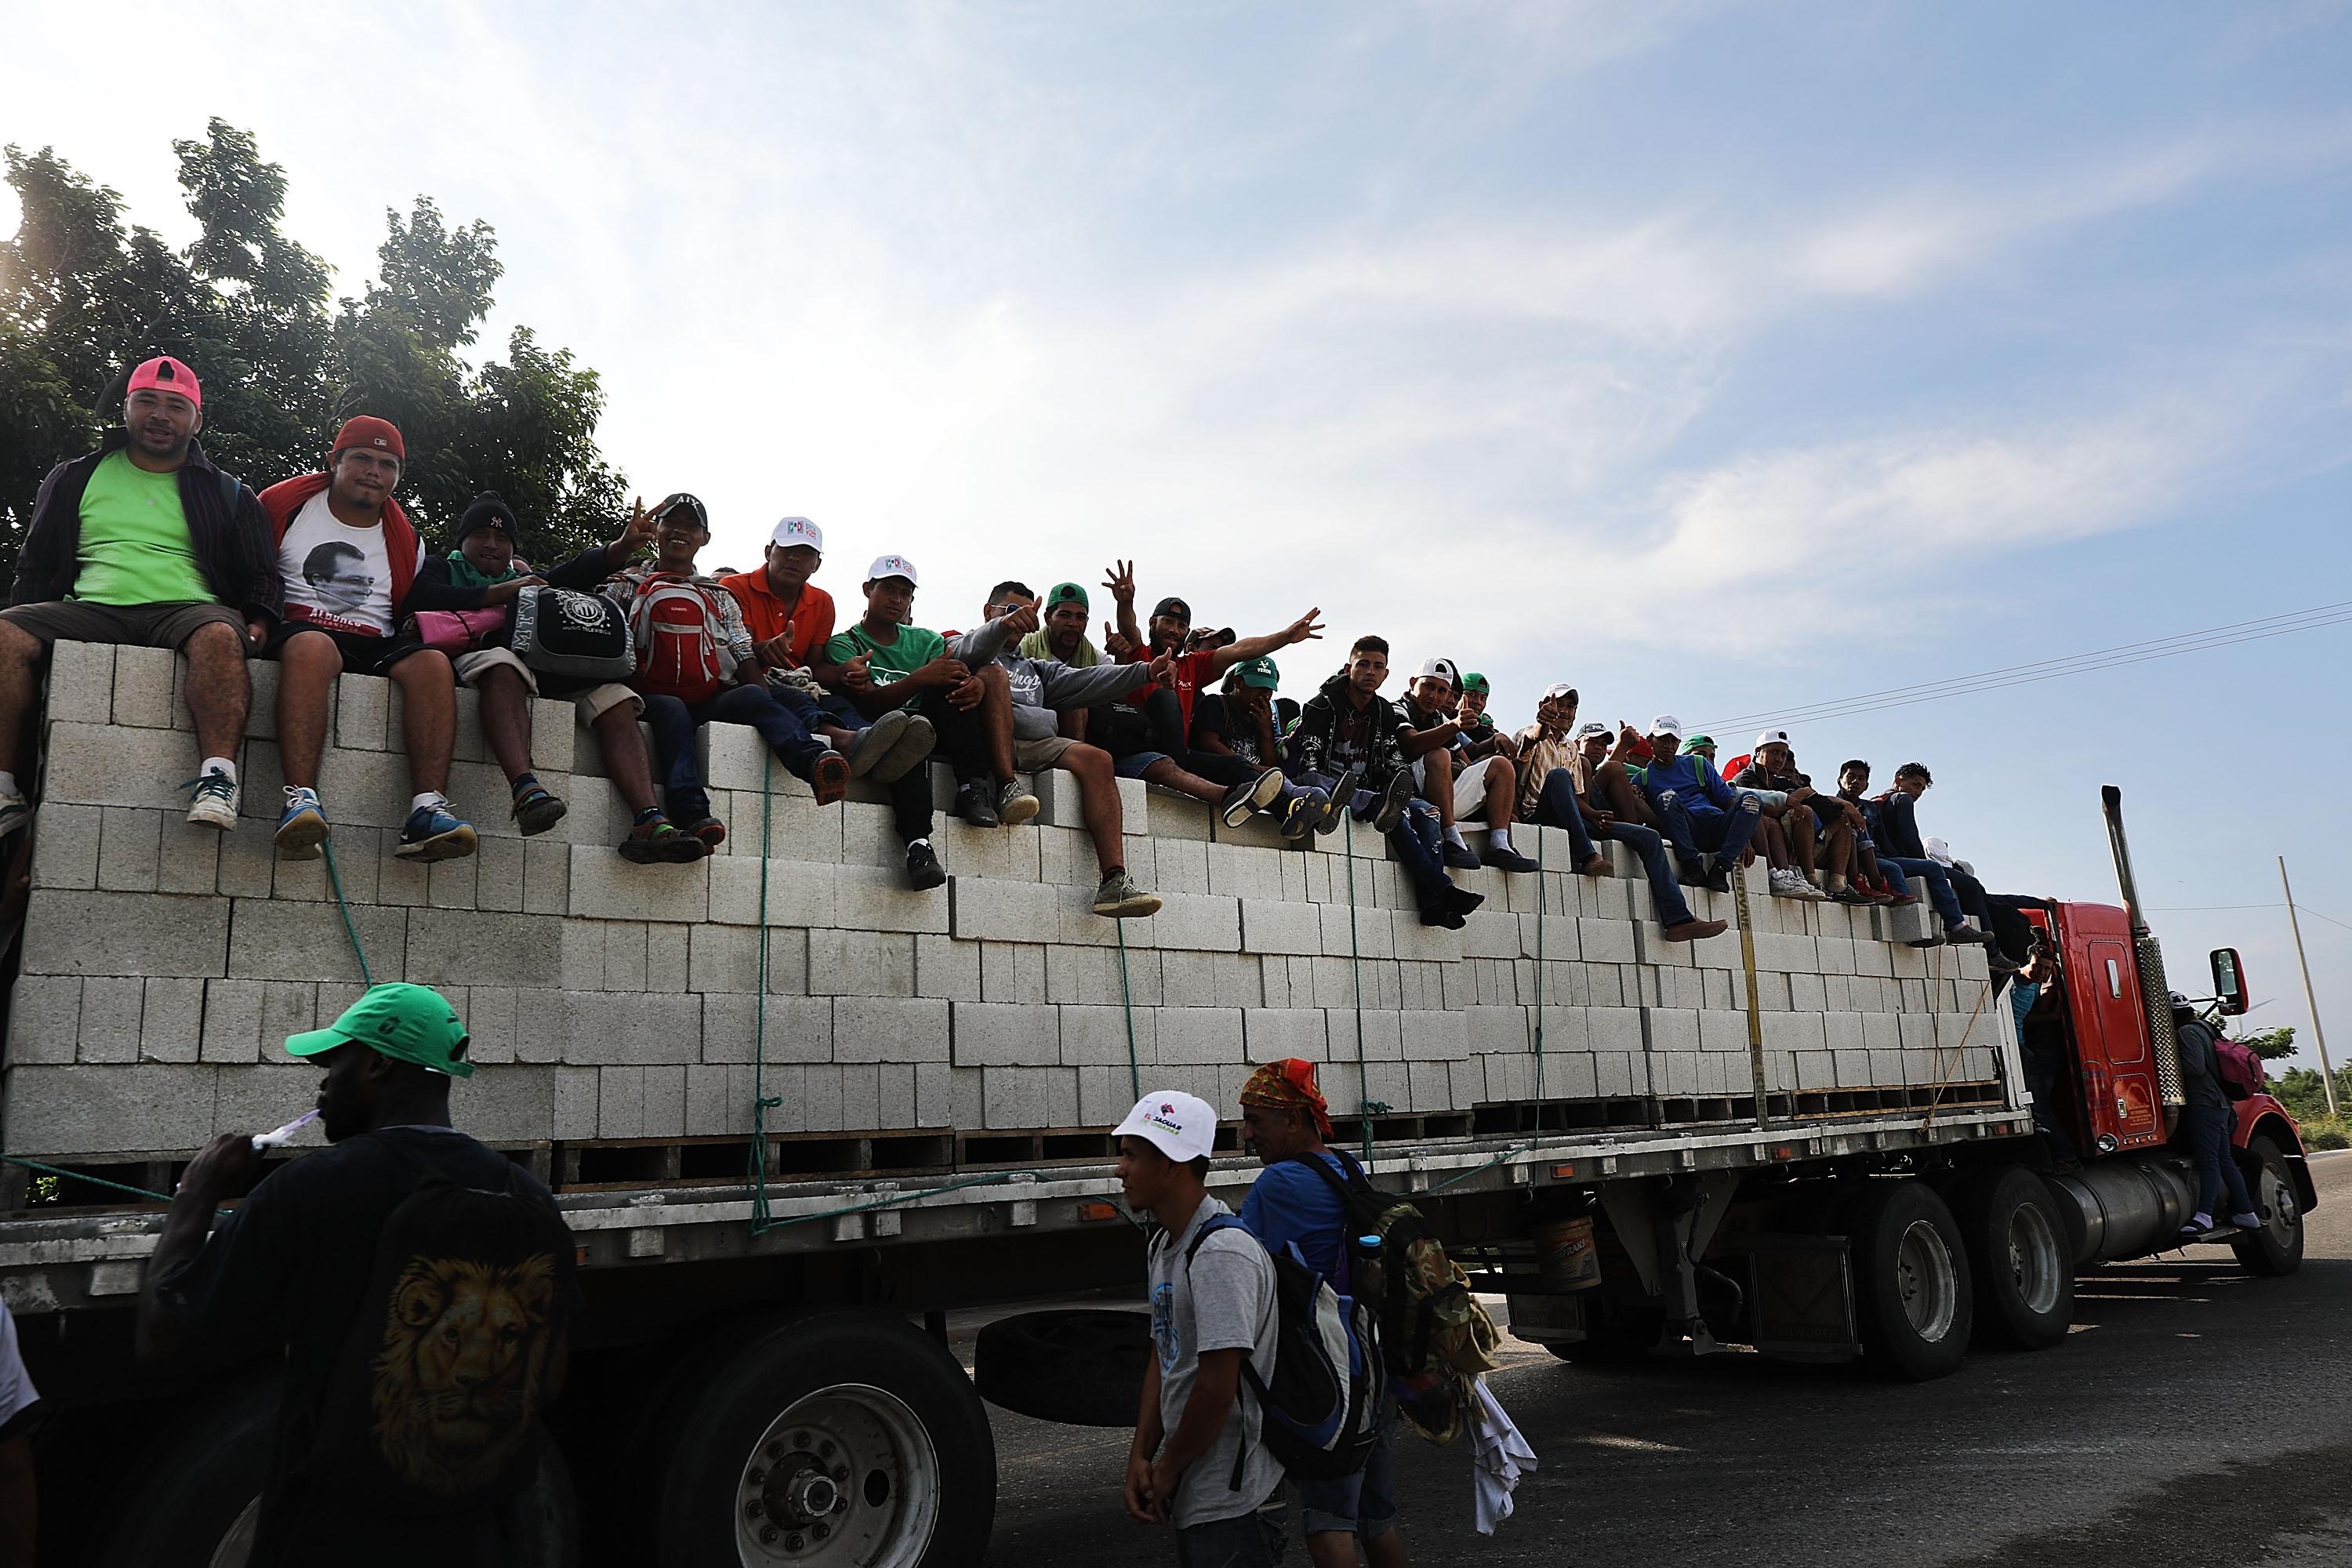 Some of the thousands of Central American migrants in the caravan get a lift to a camp.